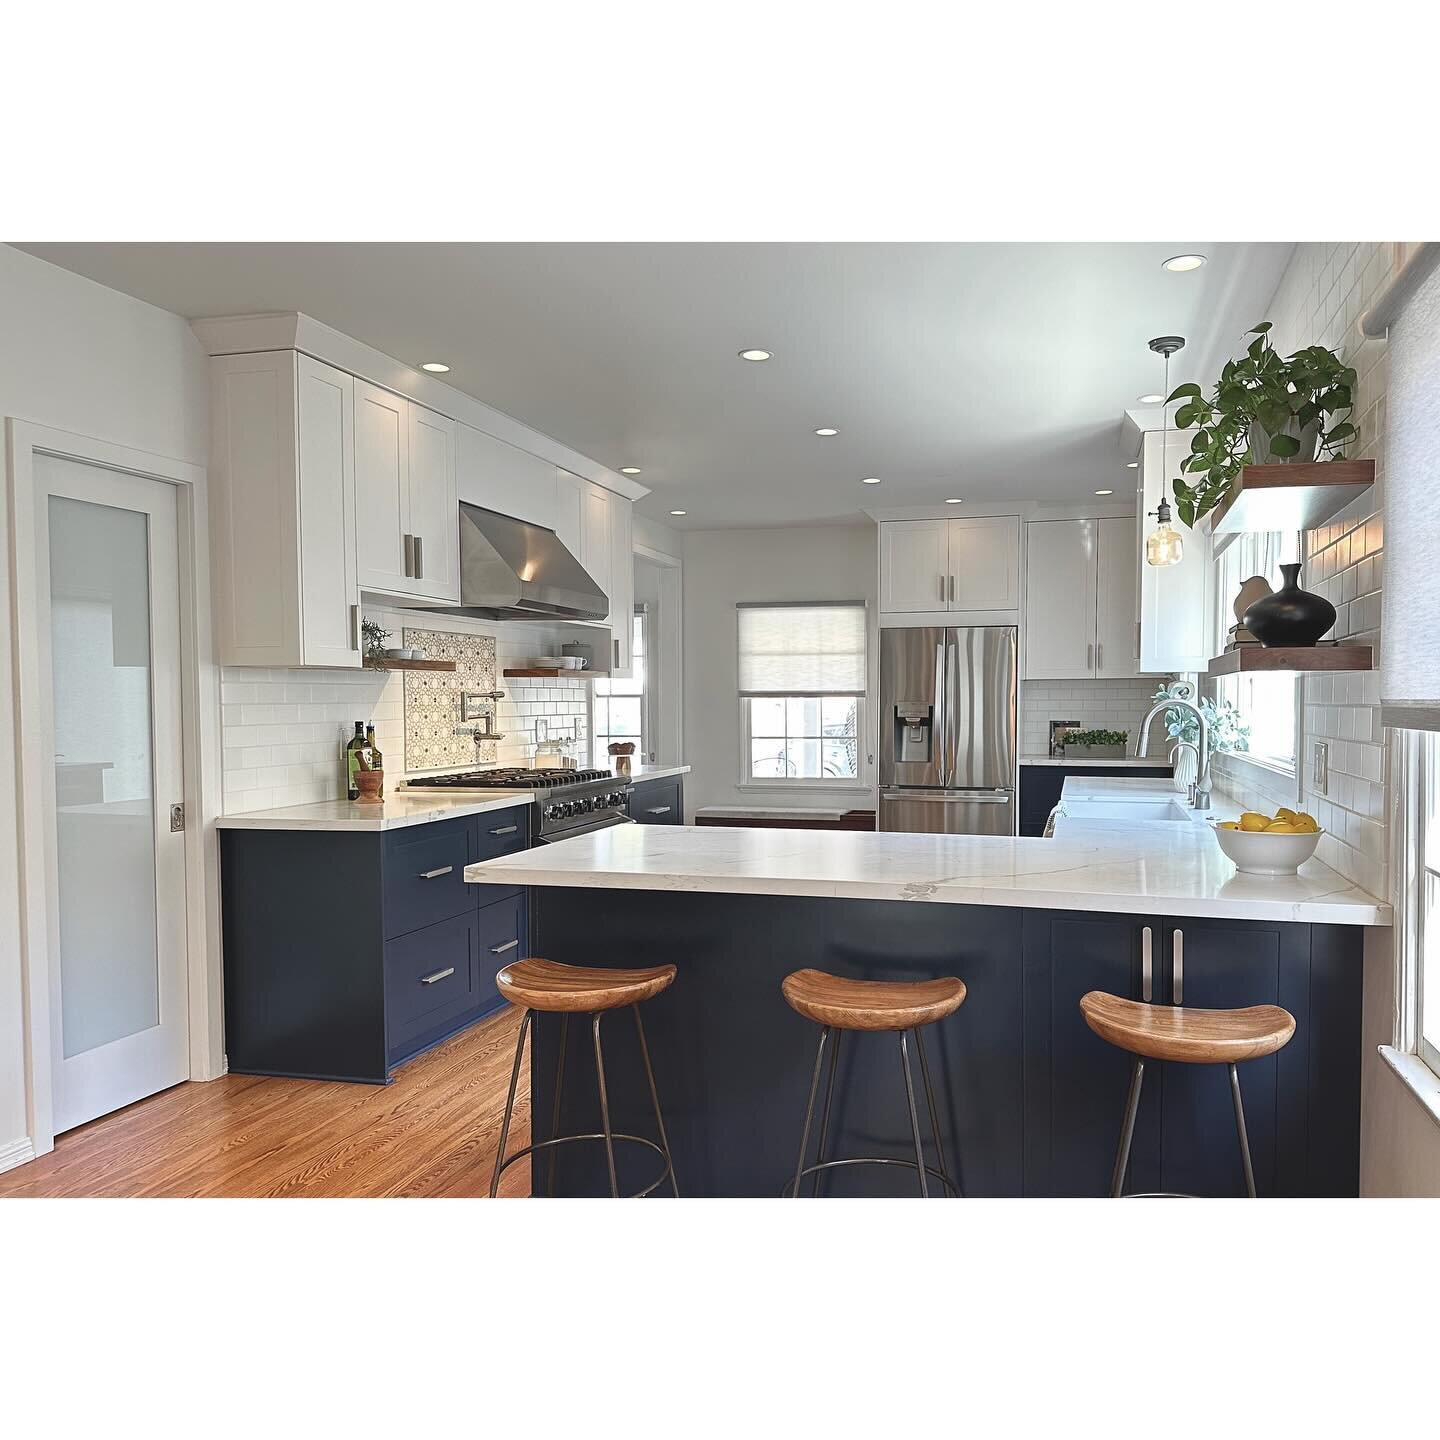 From a dark and cramped kitchen floor plan to bright, functional and open. ☀️ Swipe to see the before. 
#navyblue #kitchenrenovation #remodeling #acatslife Collaboration @redefine_designstudio